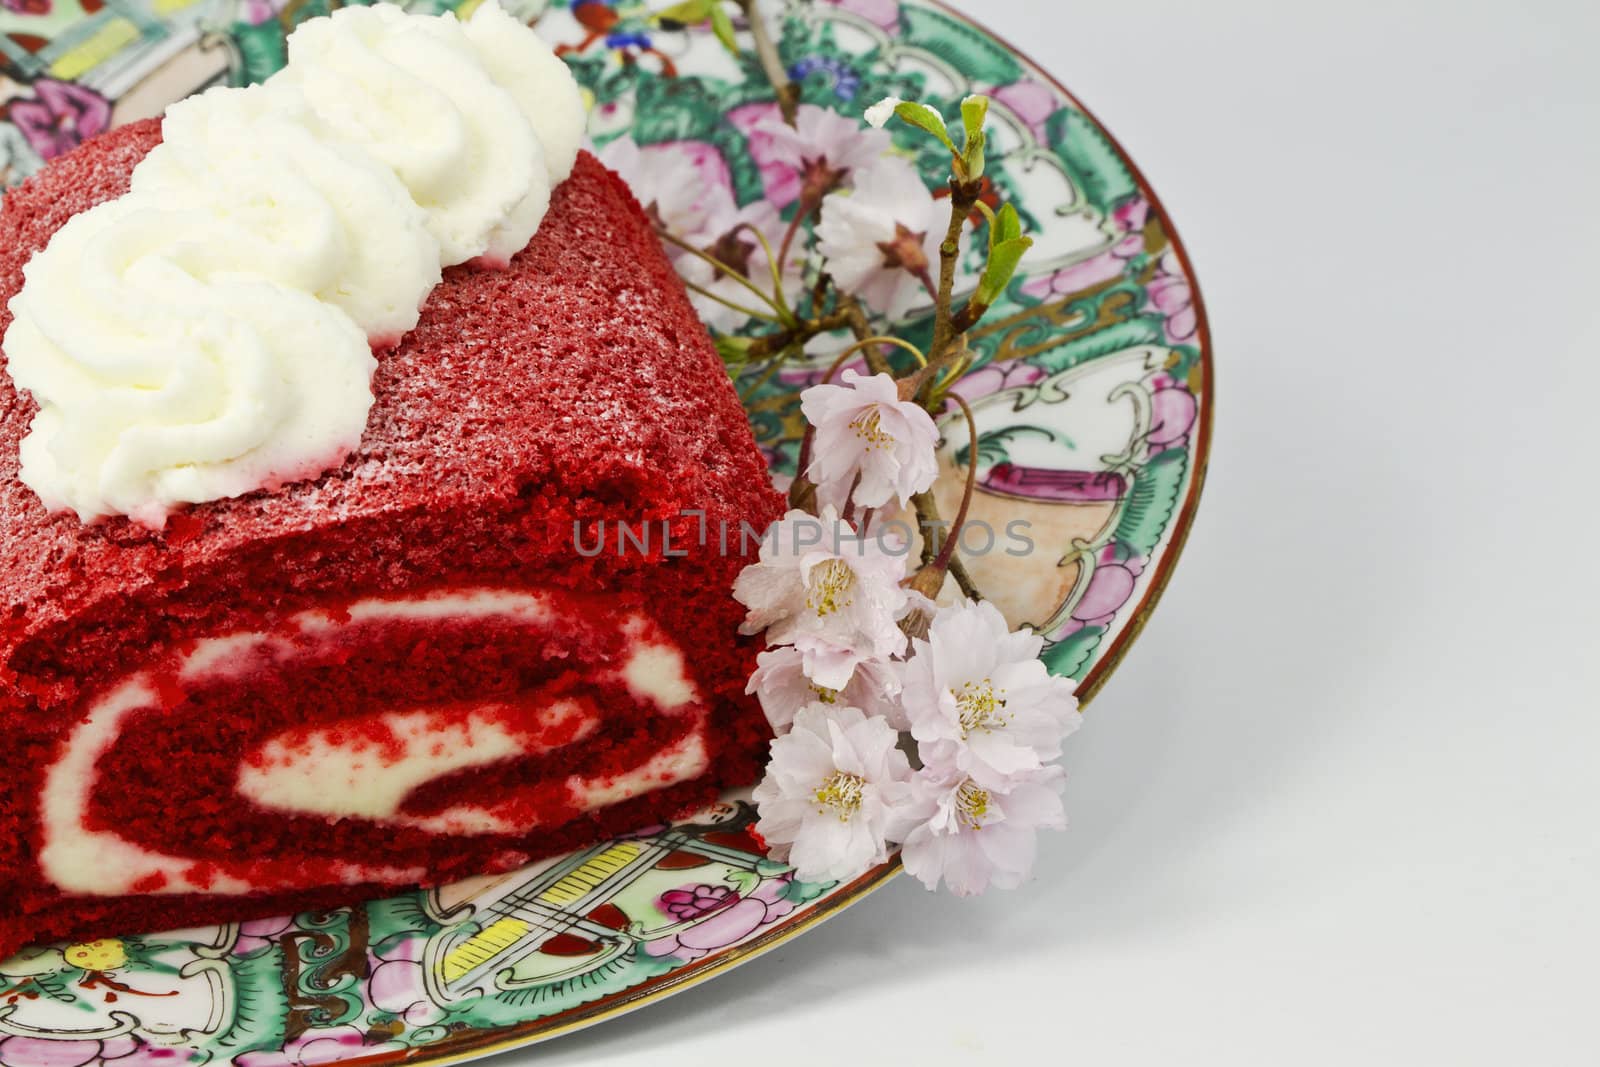 Red velvet cake roll with cream cheese frosting,  inside and on top, is placed on feminine platter with pink flowers; 